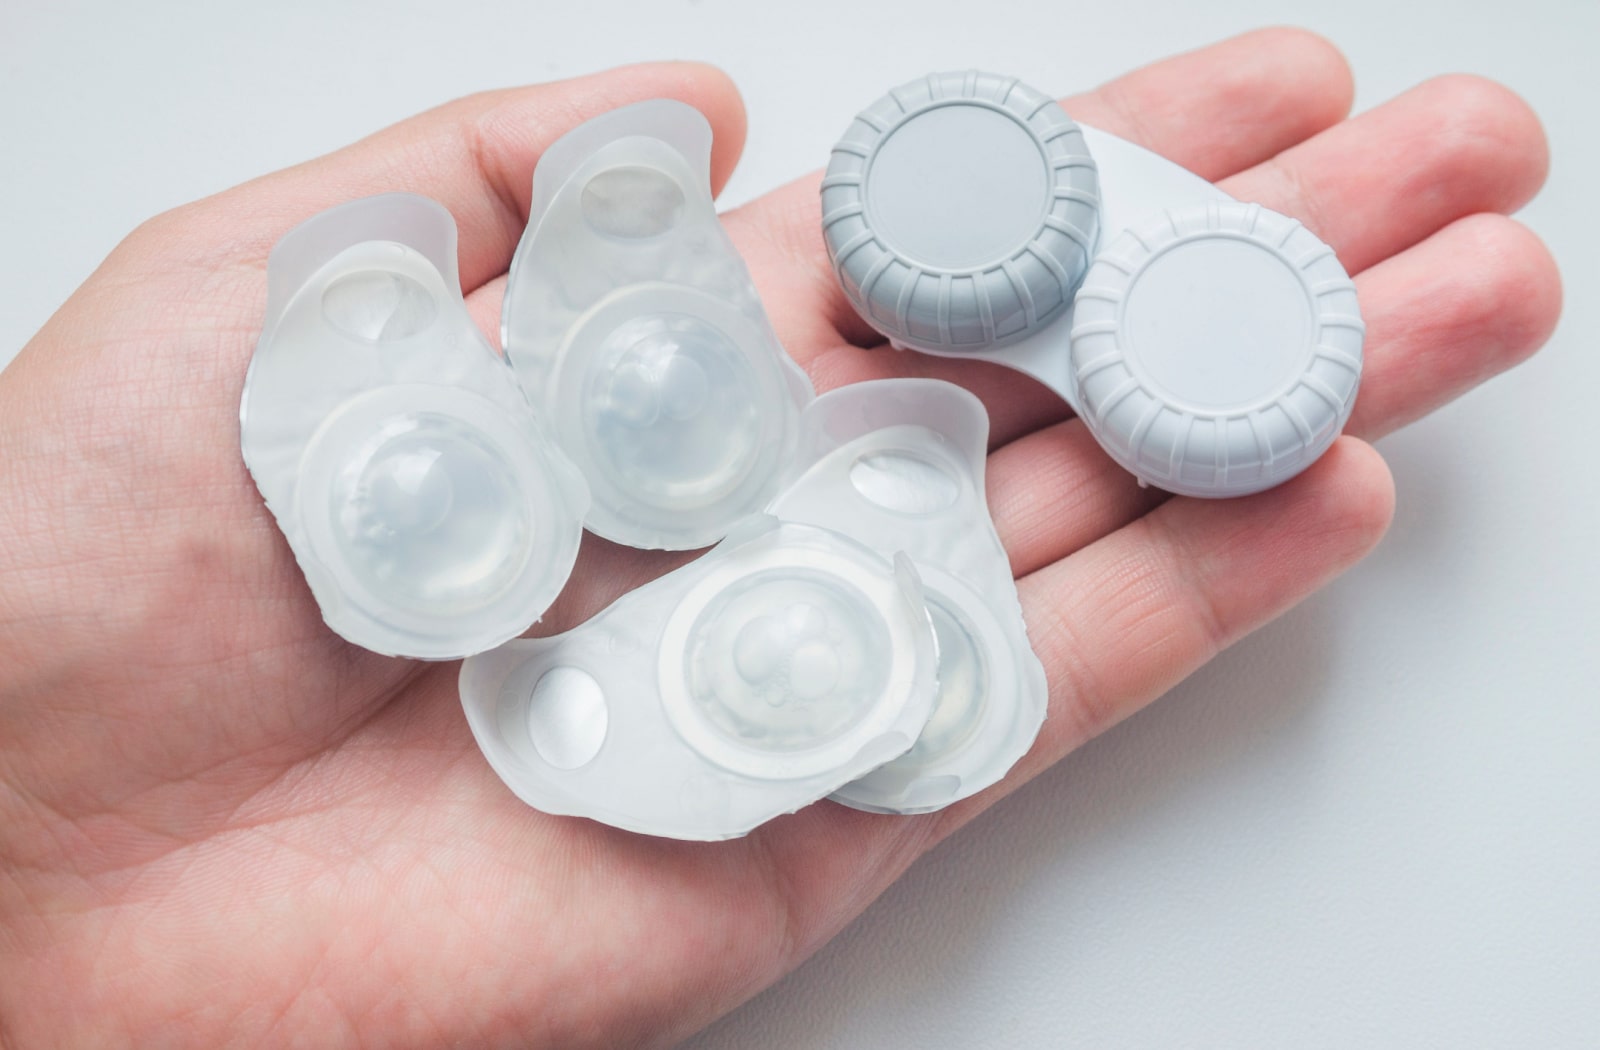 A person holding a few packs of daily contact lenses and a regular contact lens case in their hand.